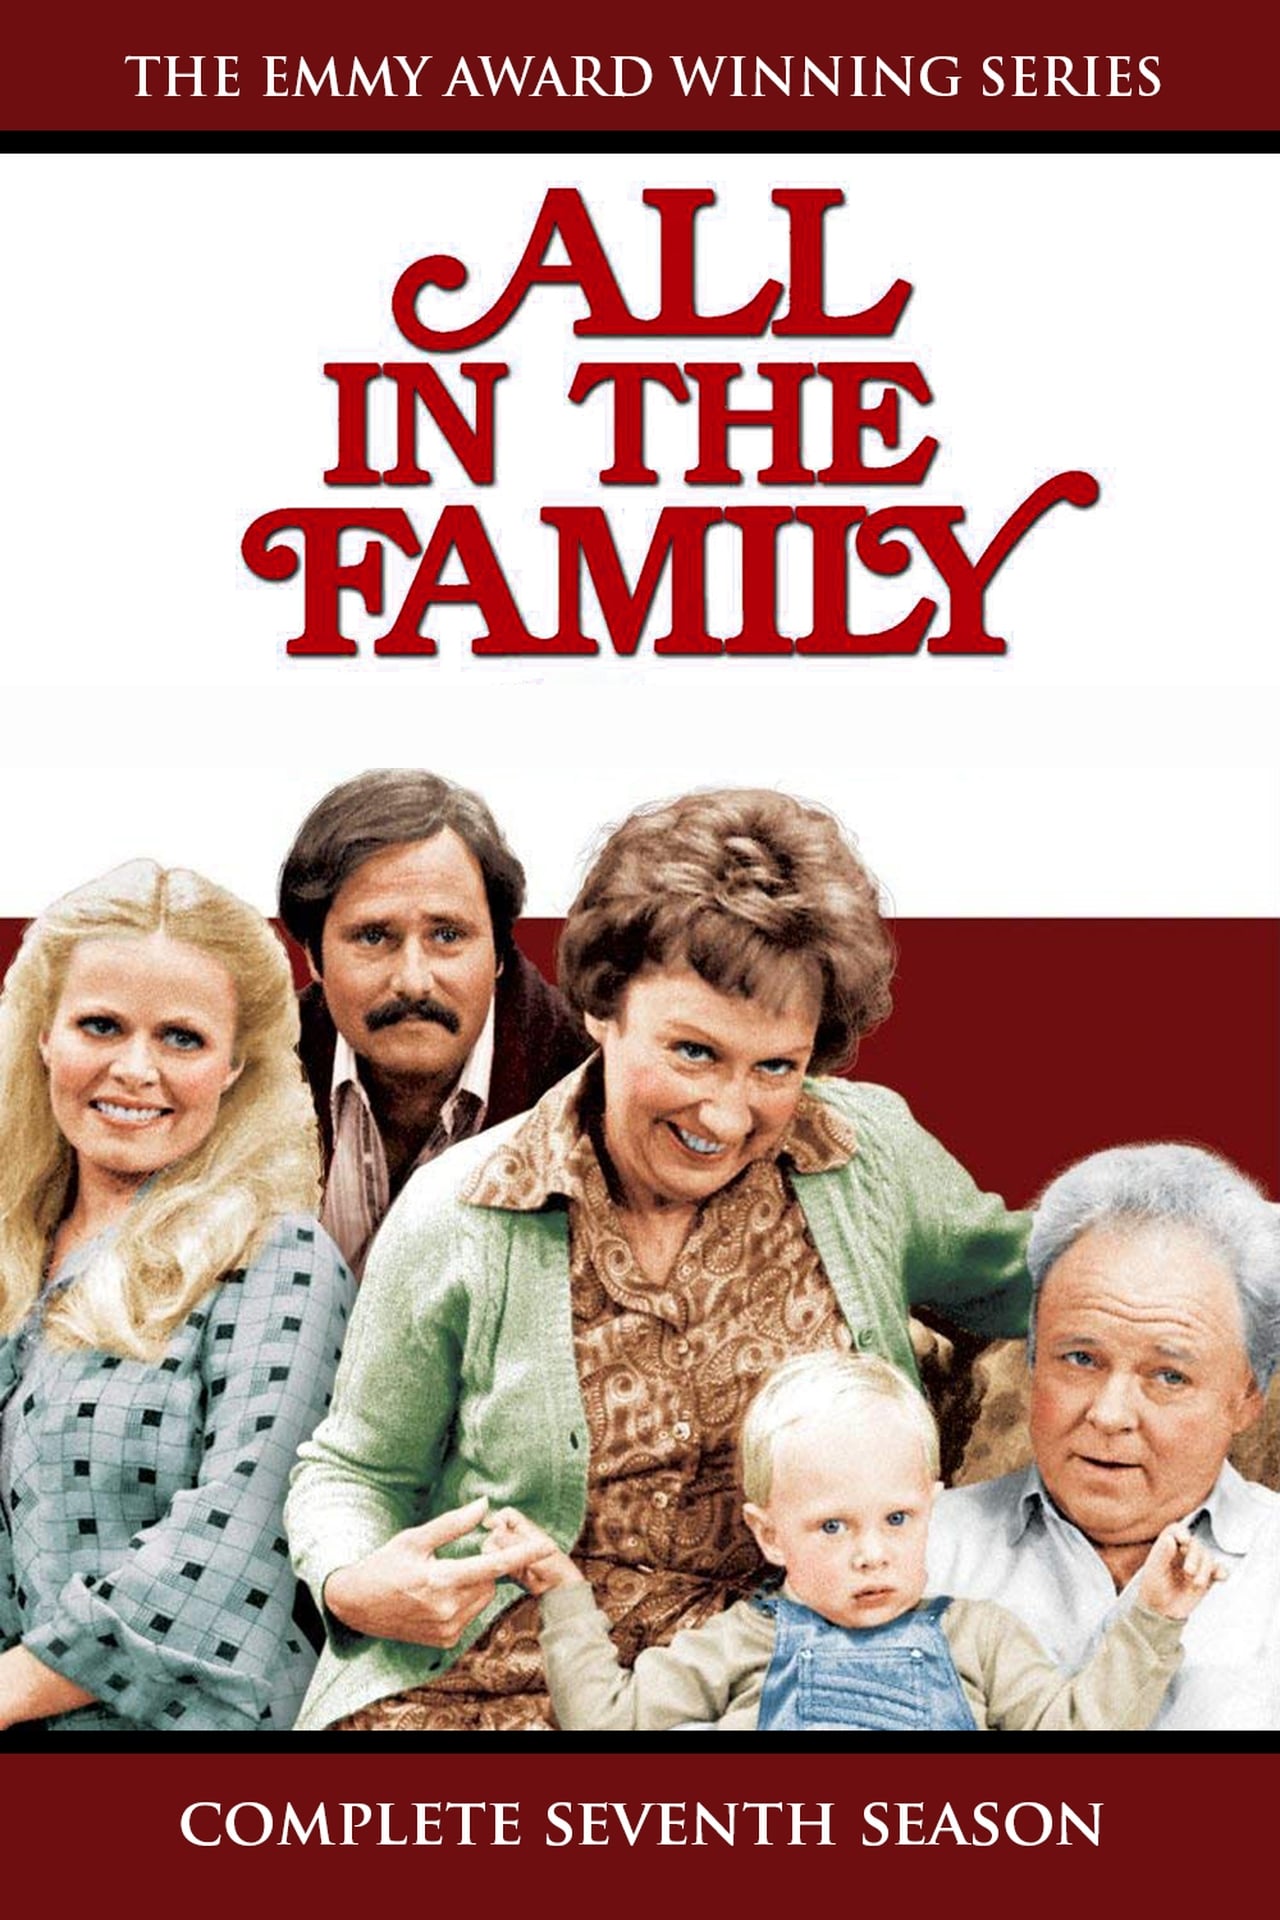 All In The Family (1976)